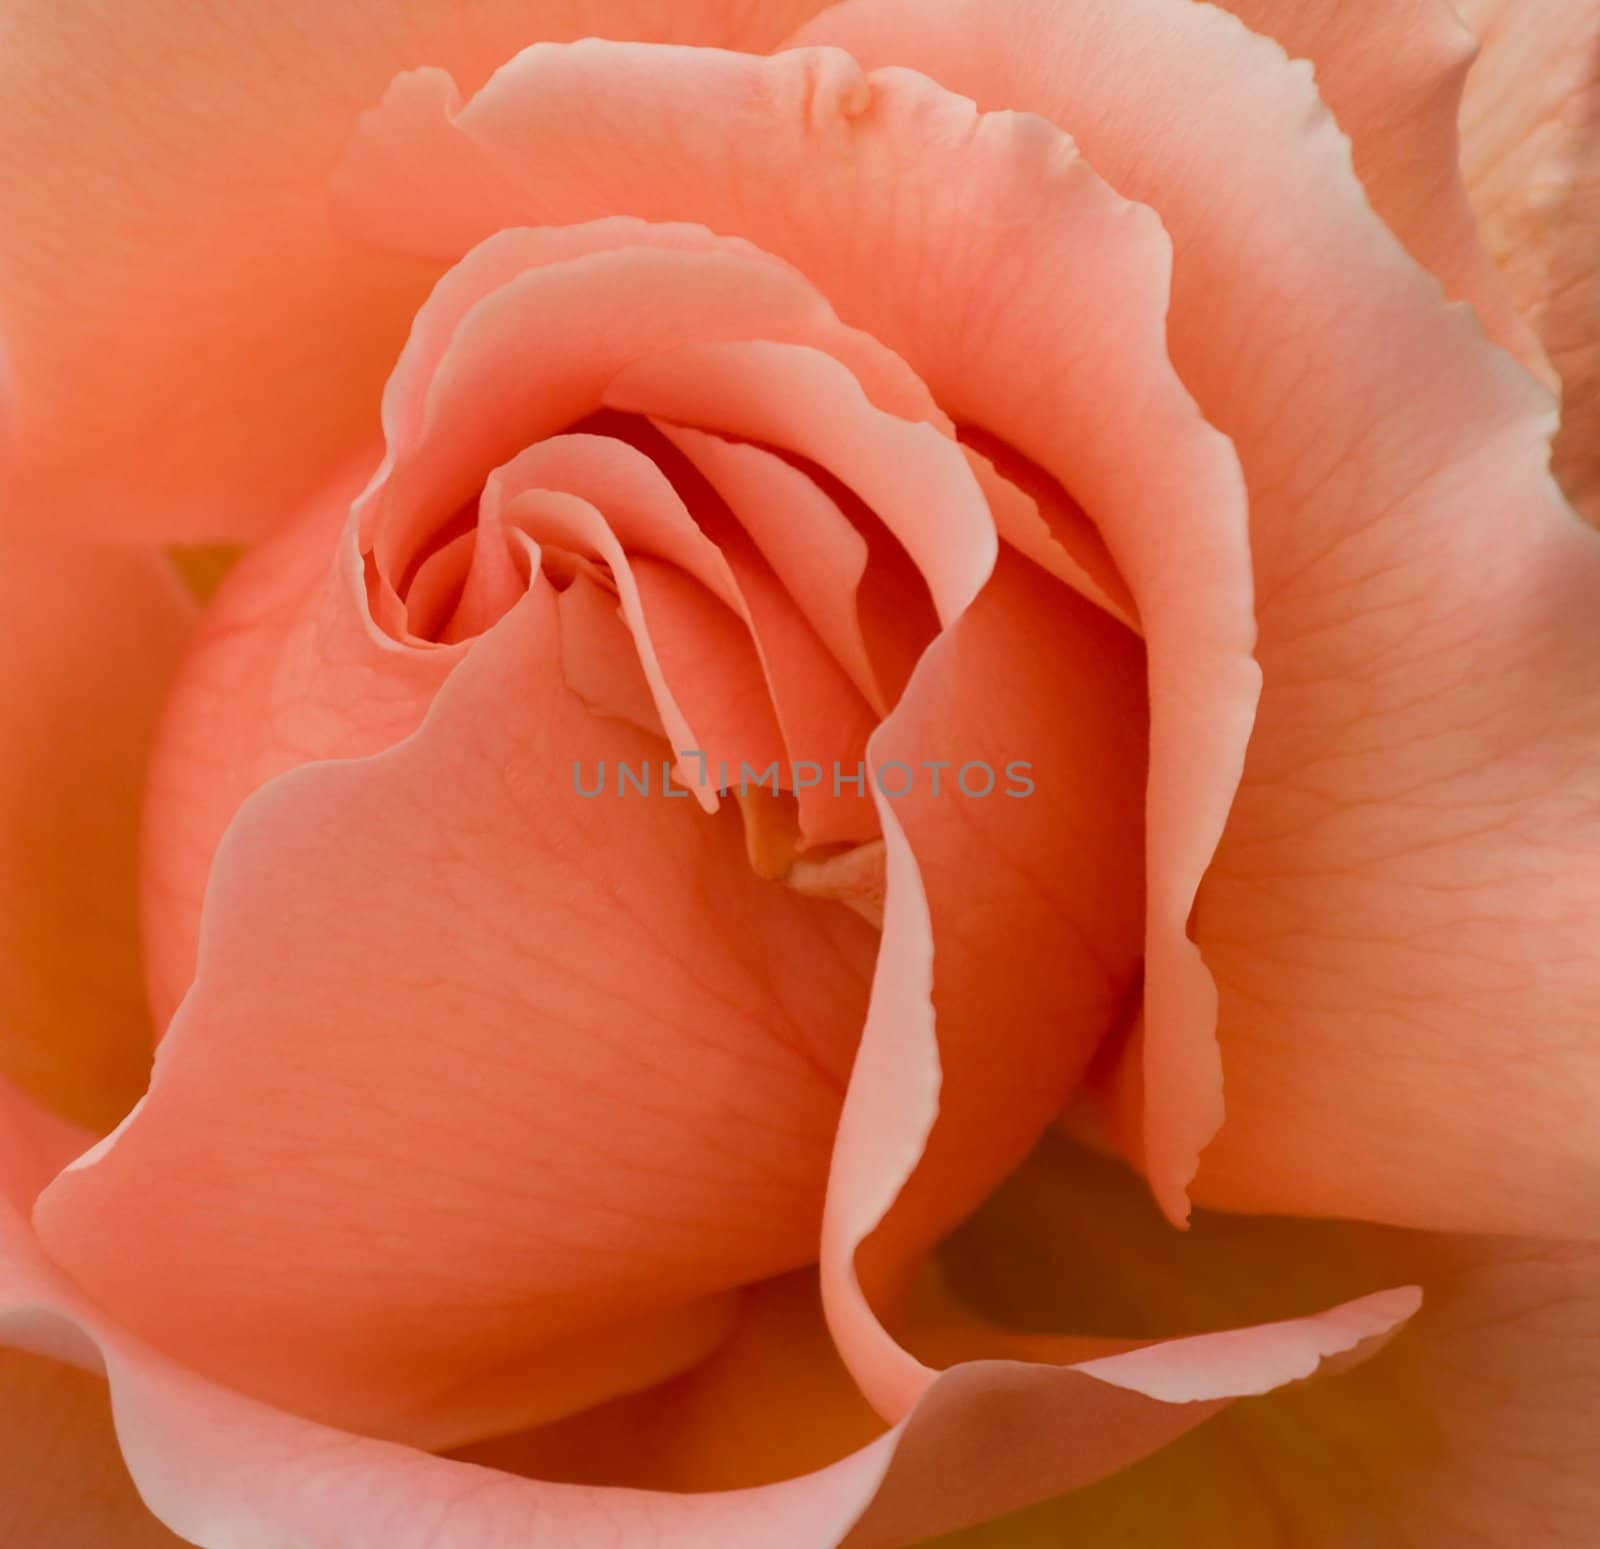 Romantic rose "Just Joey", peachy pale orange color in full-frame closeup suitable for Valentine card